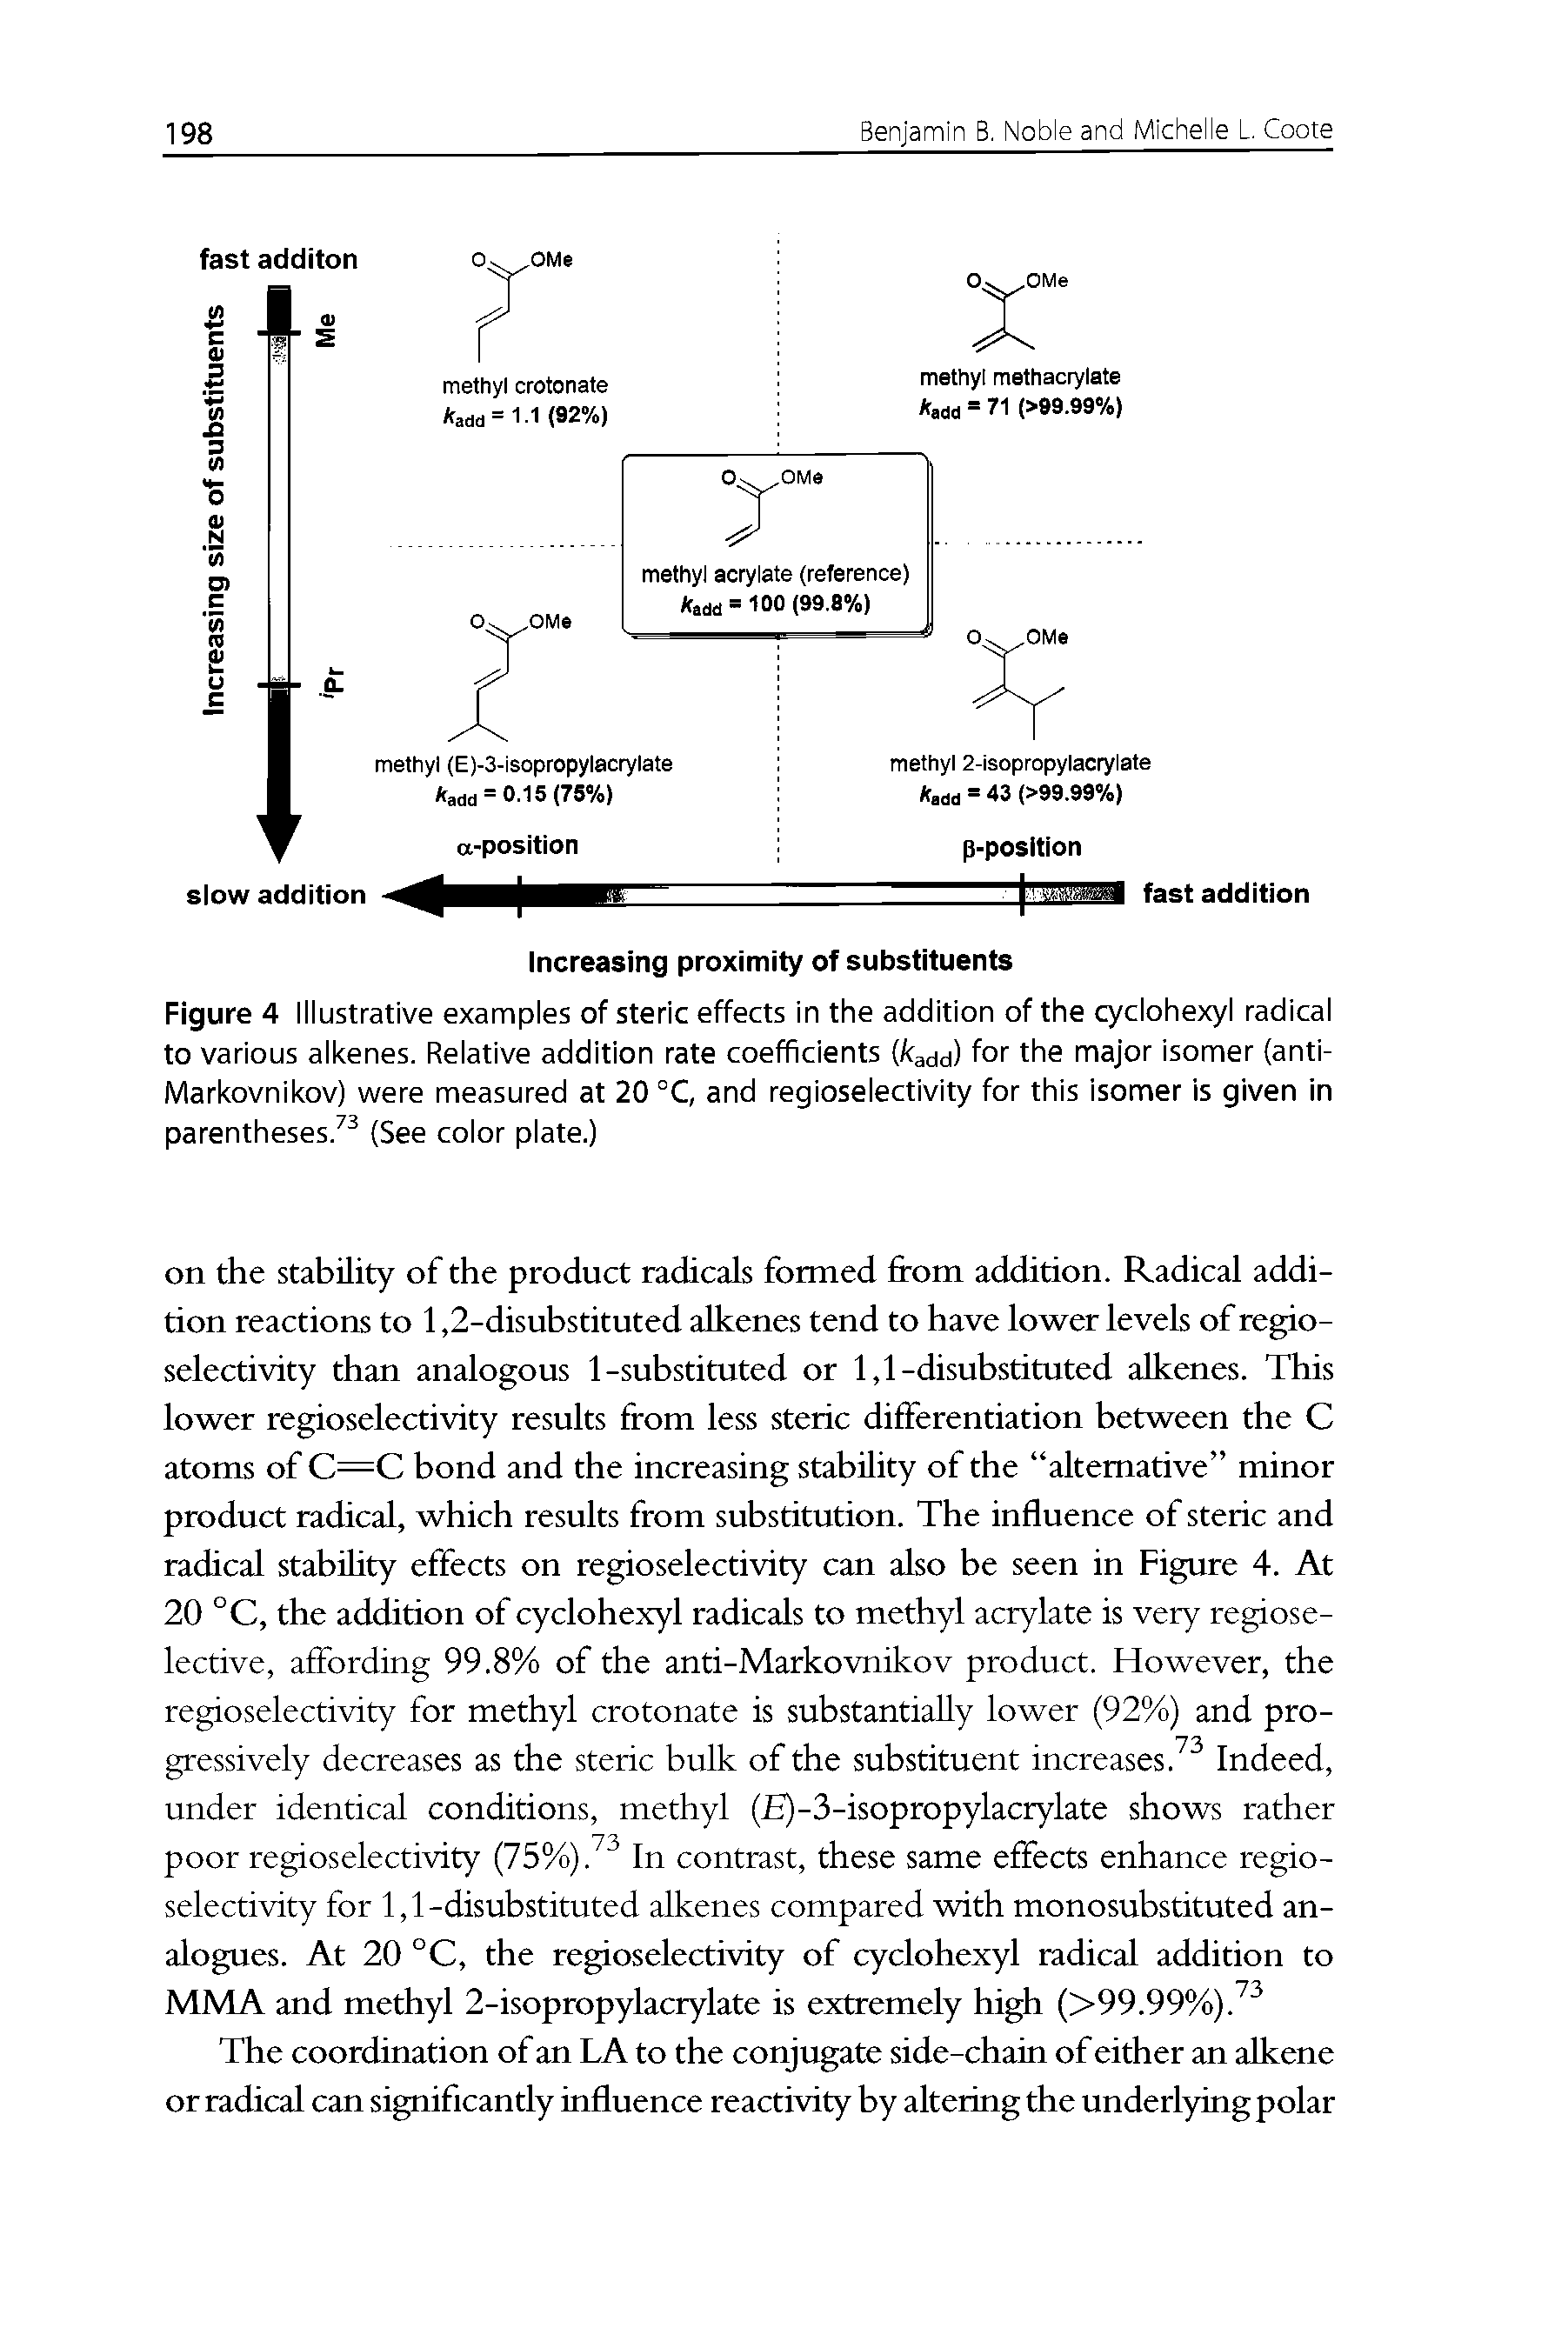 Figure 4 Illustrative examples of steric effects in the addition of the cyclohexyl radical to various alkenes. Relative addition rate coefficients (/Cadd) for the major isomer (anti-Markovnikov) were measured at 20 °C, and regioselectivity for this isomer is given in parentheses/ (See color plate.)...